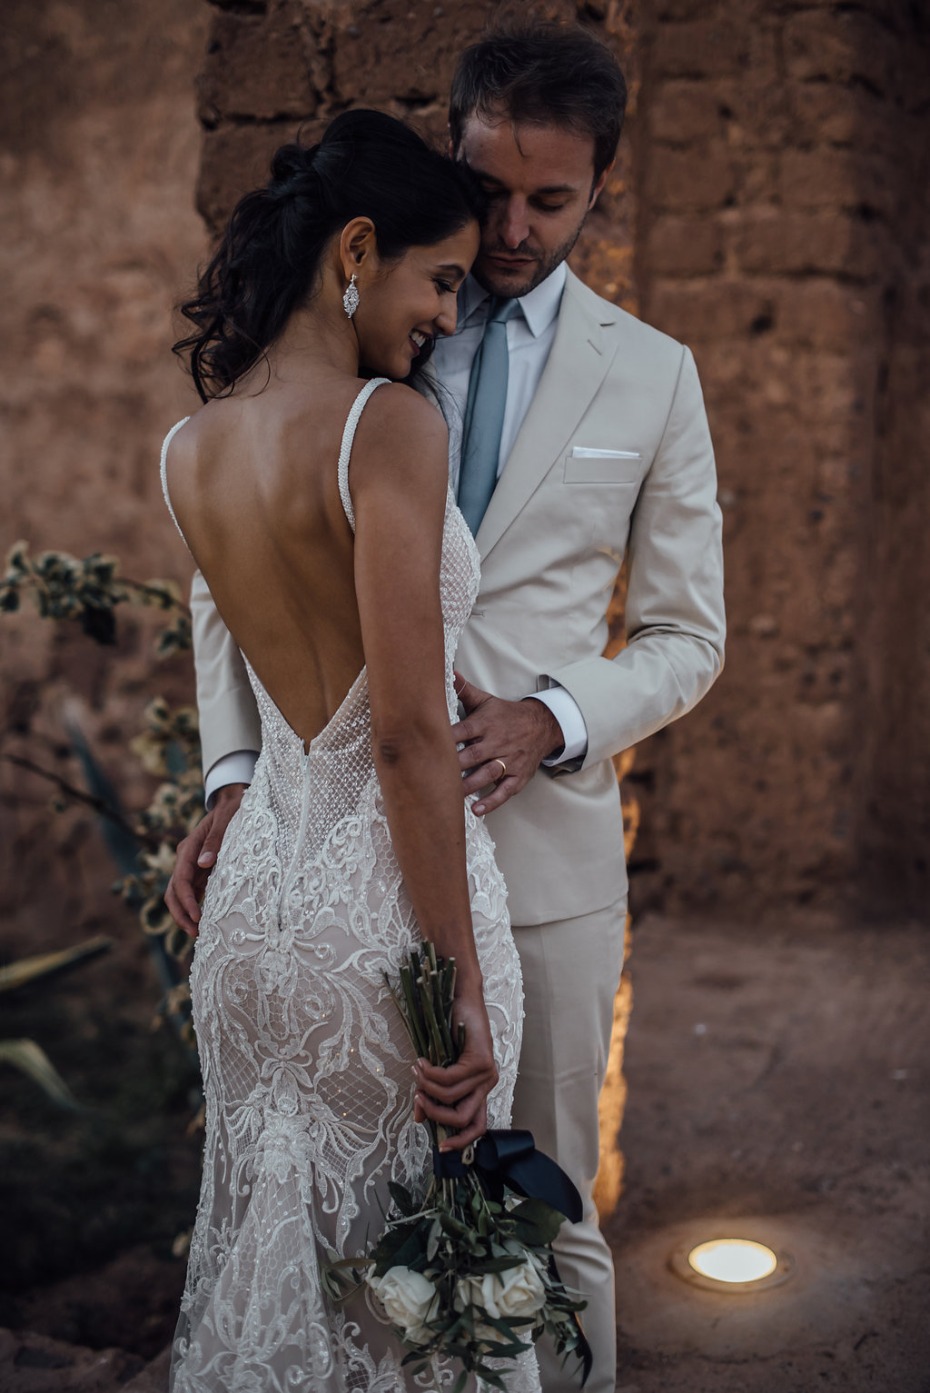 Galia Lahav Is the Gold Behind One of Our Favorite Feeds